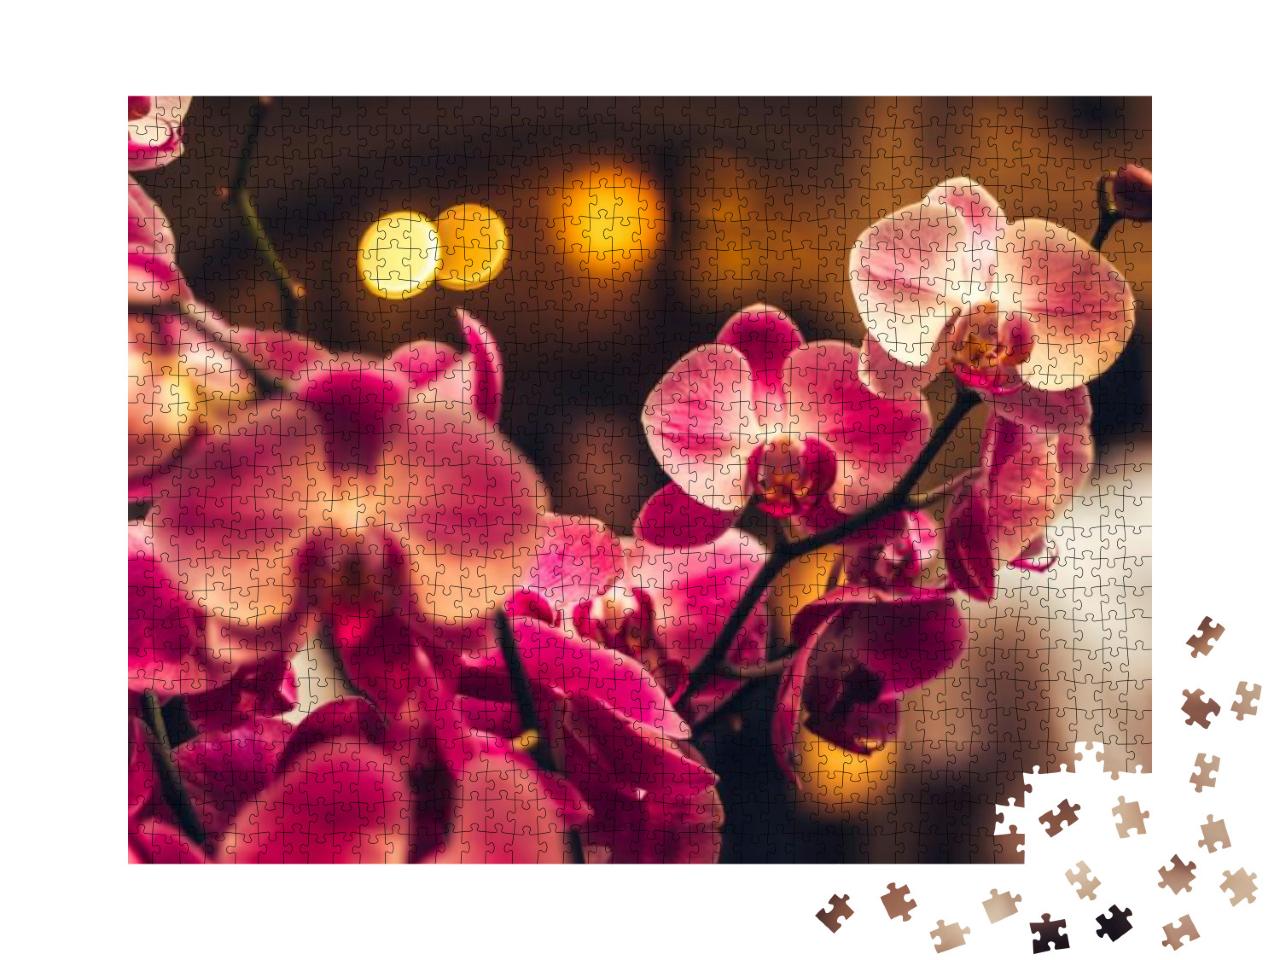 Orchid Flower in Winter or Spring Day Tropical Garden Bac... Jigsaw Puzzle with 1000 pieces